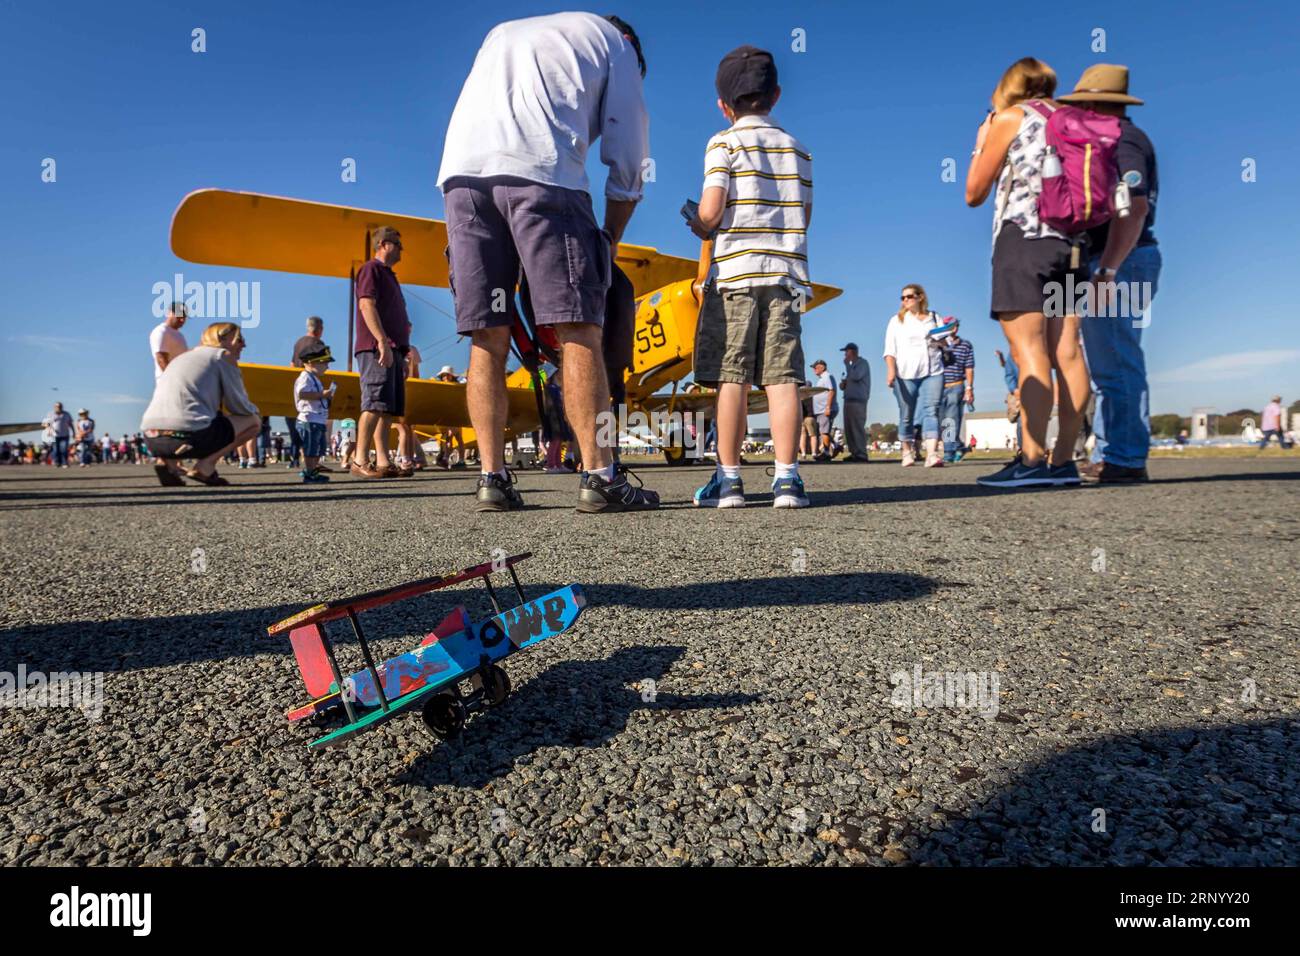 (180408) -- CANBERRA, April 8, 2018 -- Visitors view an aircraft during the Canberra Airport Open Day in Canberra, Australia, on April 8, 2018. ) (zf) AUSTRALIA-CANBERRA-AIRPORT-OPEN DAY ZhuxNan PUBLICATIONxNOTxINxCHN Stock Photo